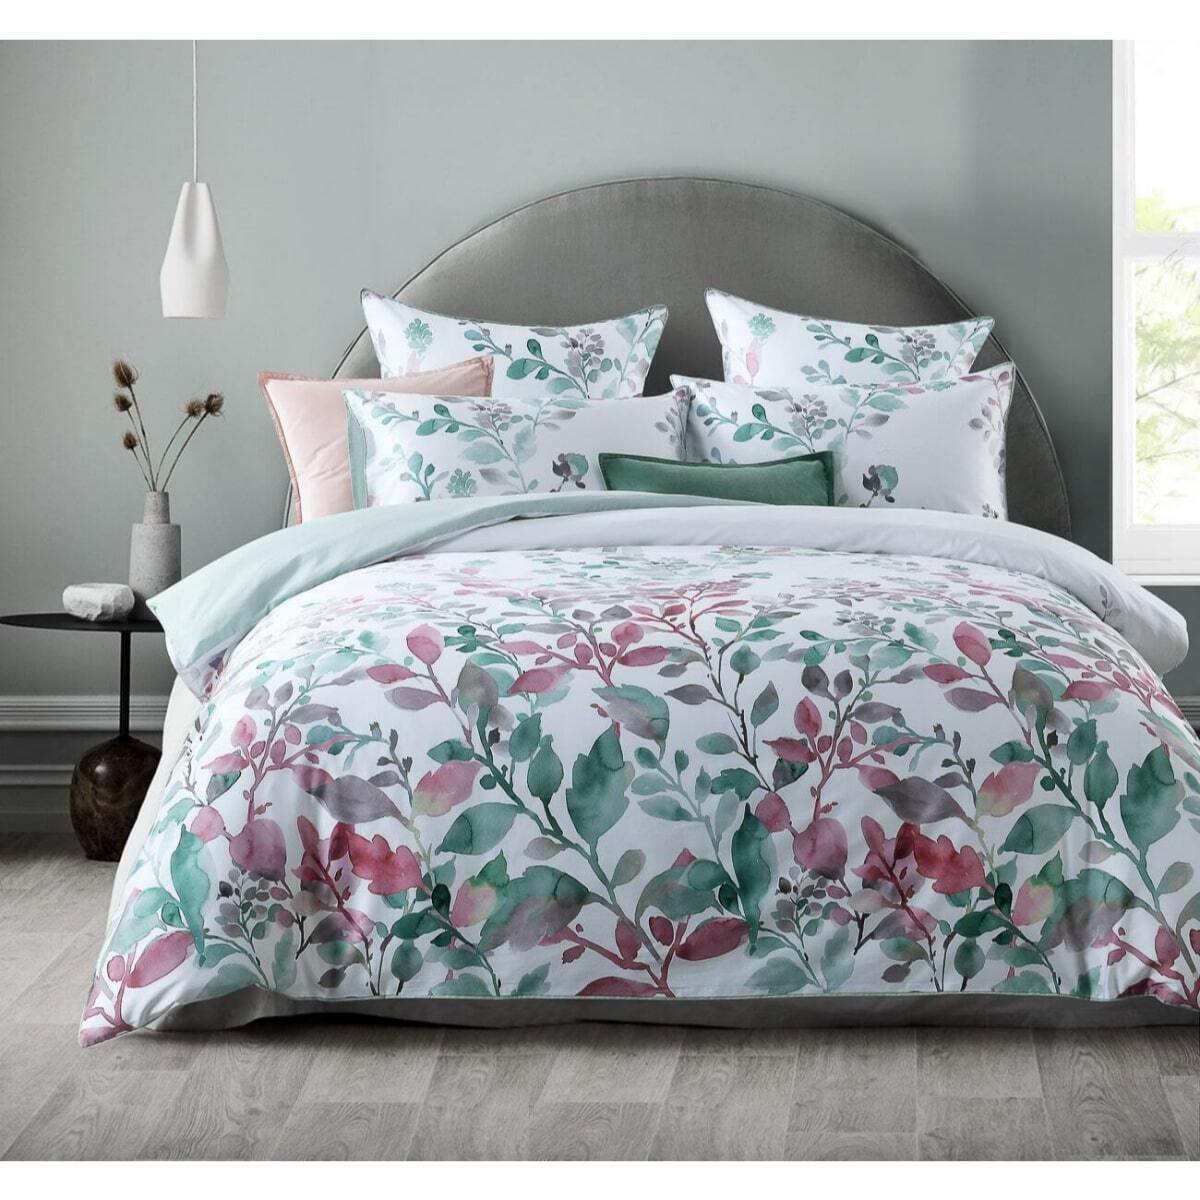 Cascade Quilt Cover Set [SIZE: Super King Bed]